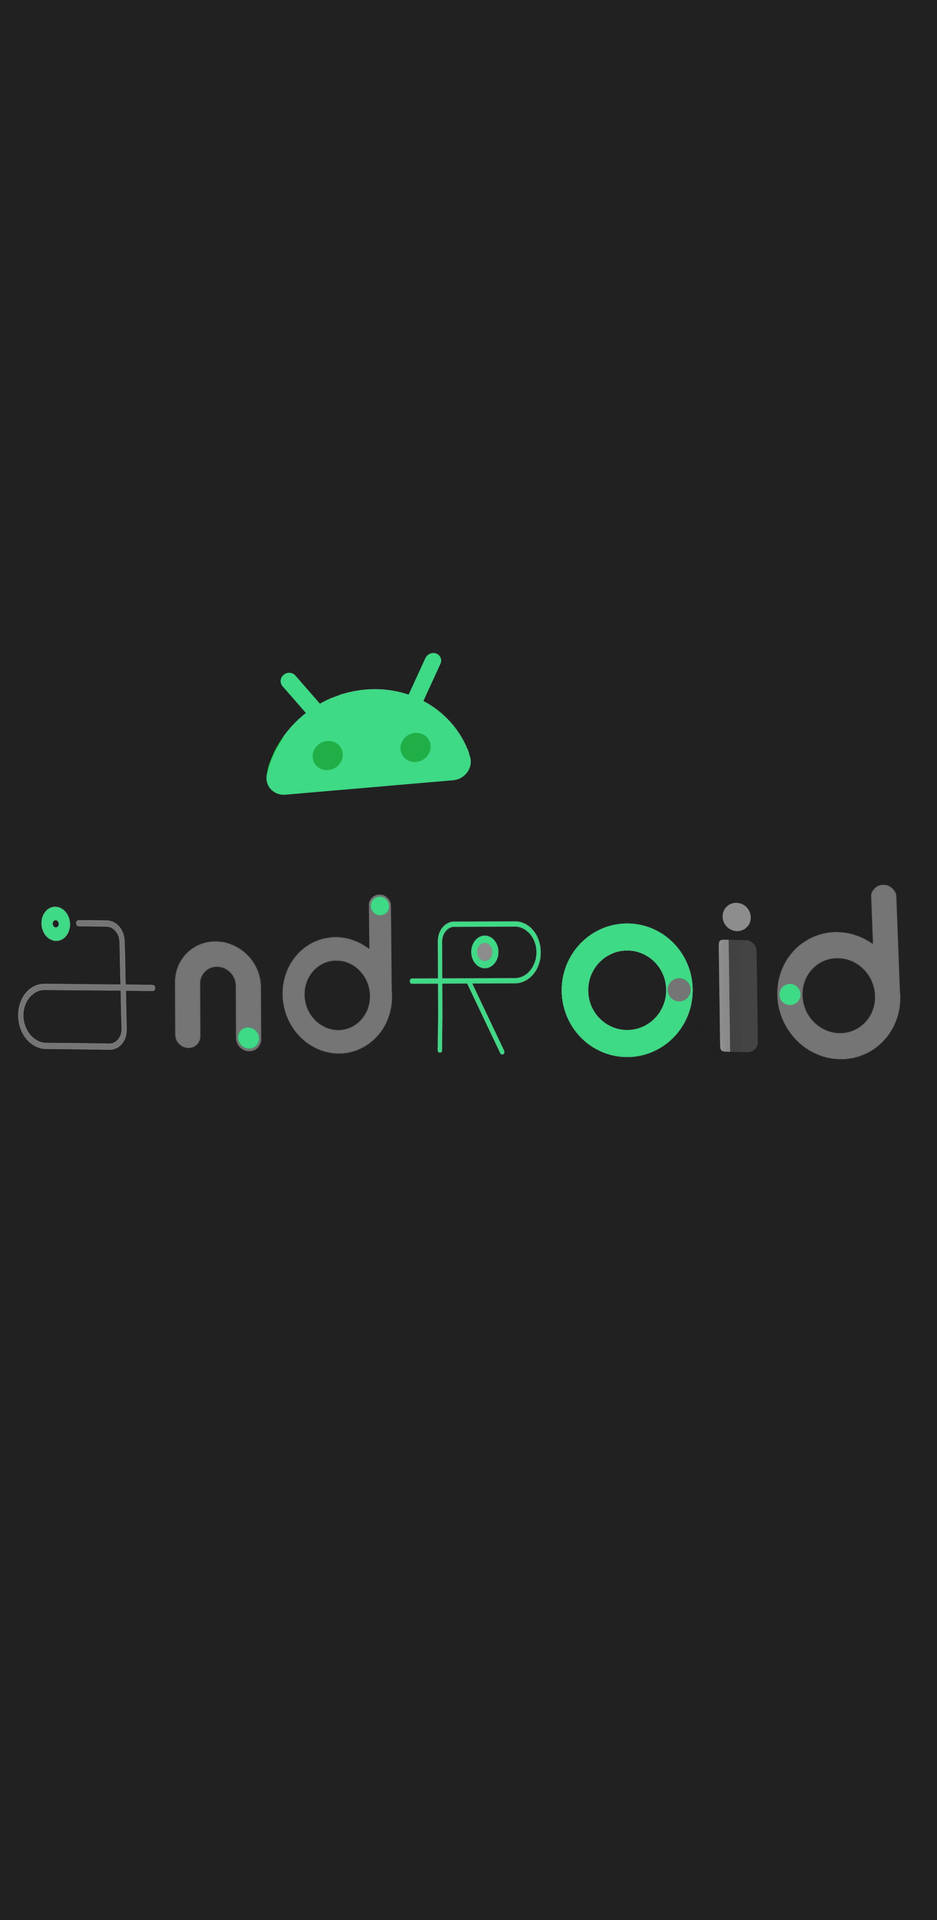 Artistic Robotic Logo Android Phone Background